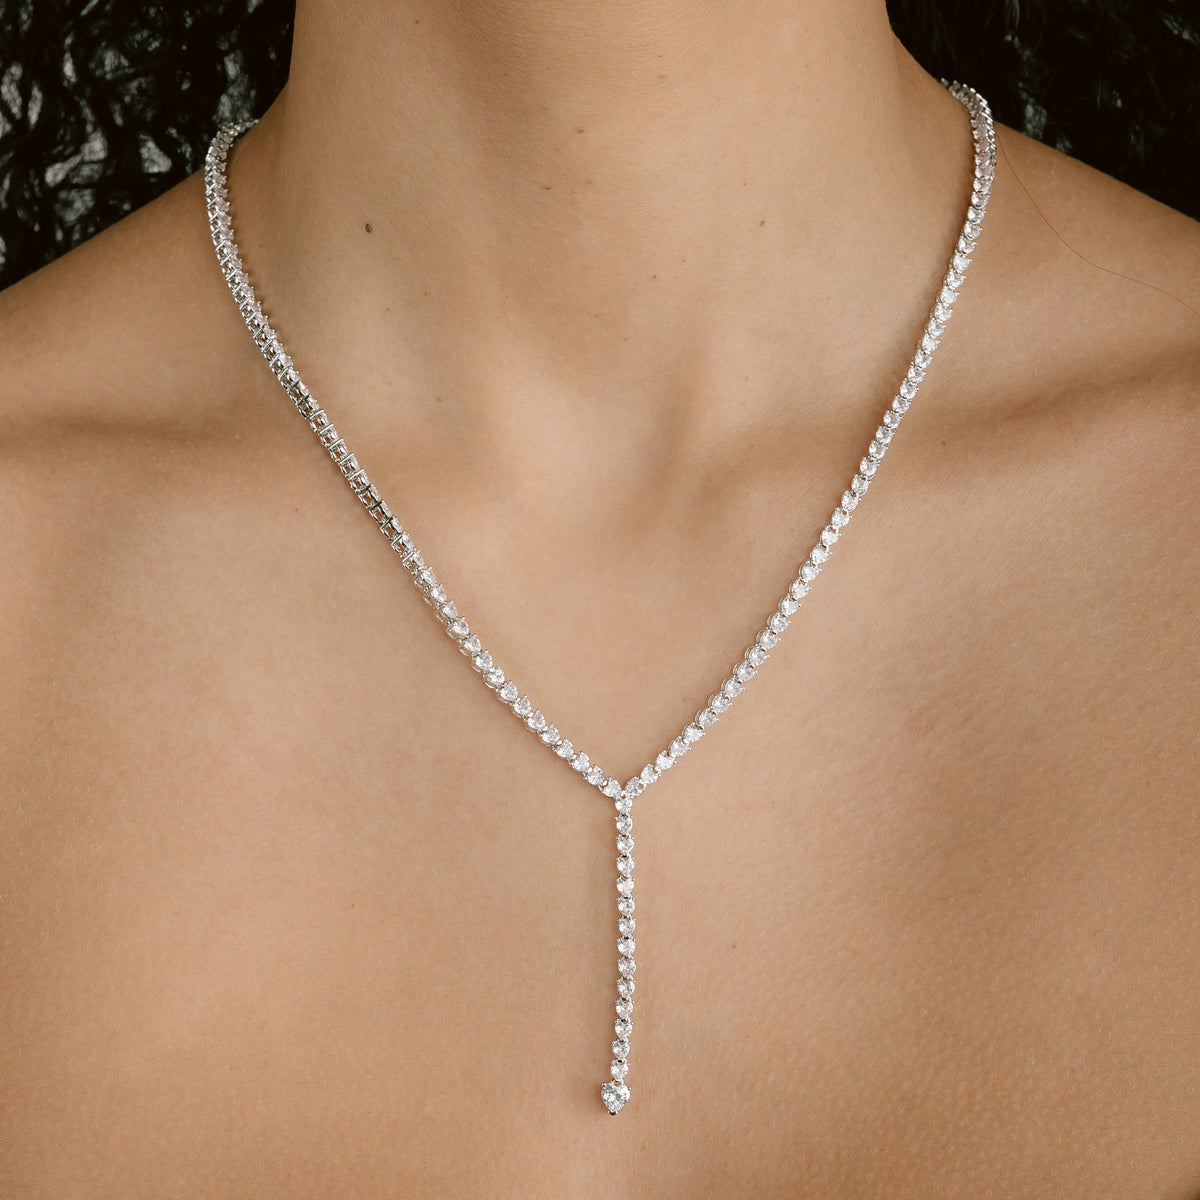 Heartcut Flooded Chain White Gold